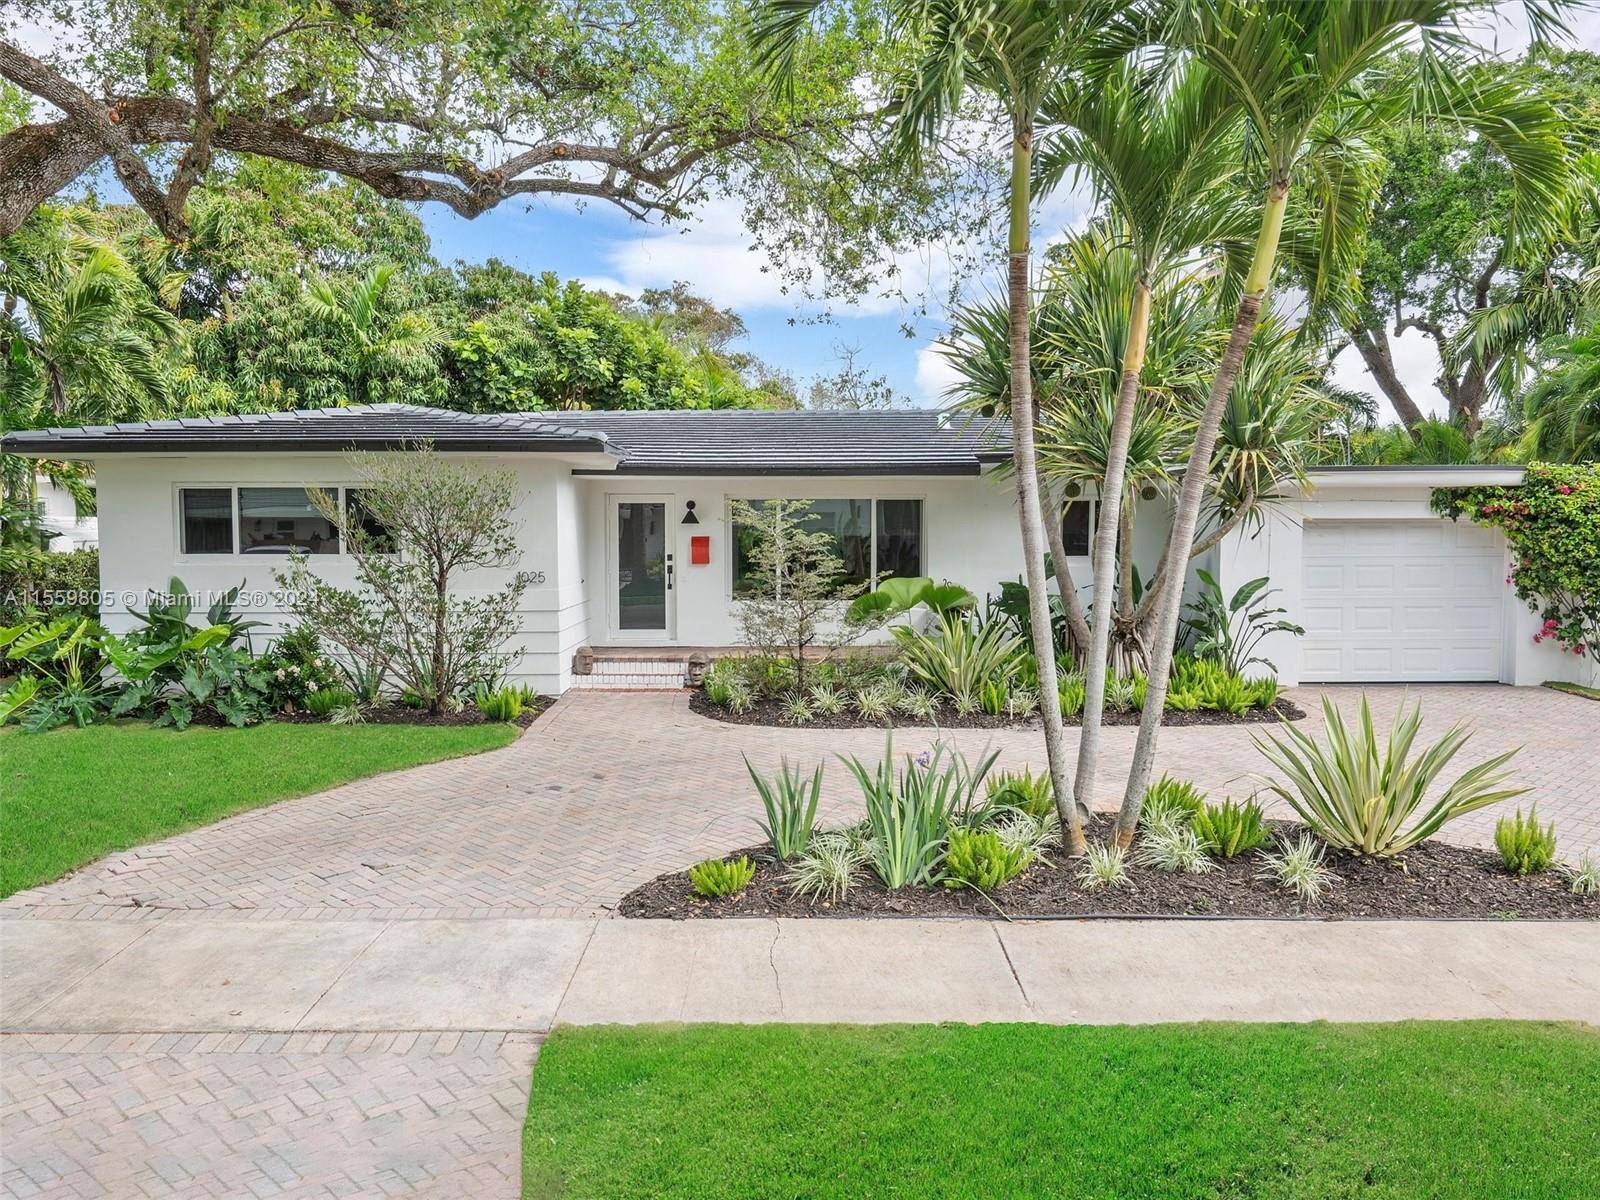 Welcome to your dream home located in East Miami Shores, a highly sought after Miami neighborhood which features 3 bedrooms plus a den office, 3 full bathrooms, high ceilings, impact ...